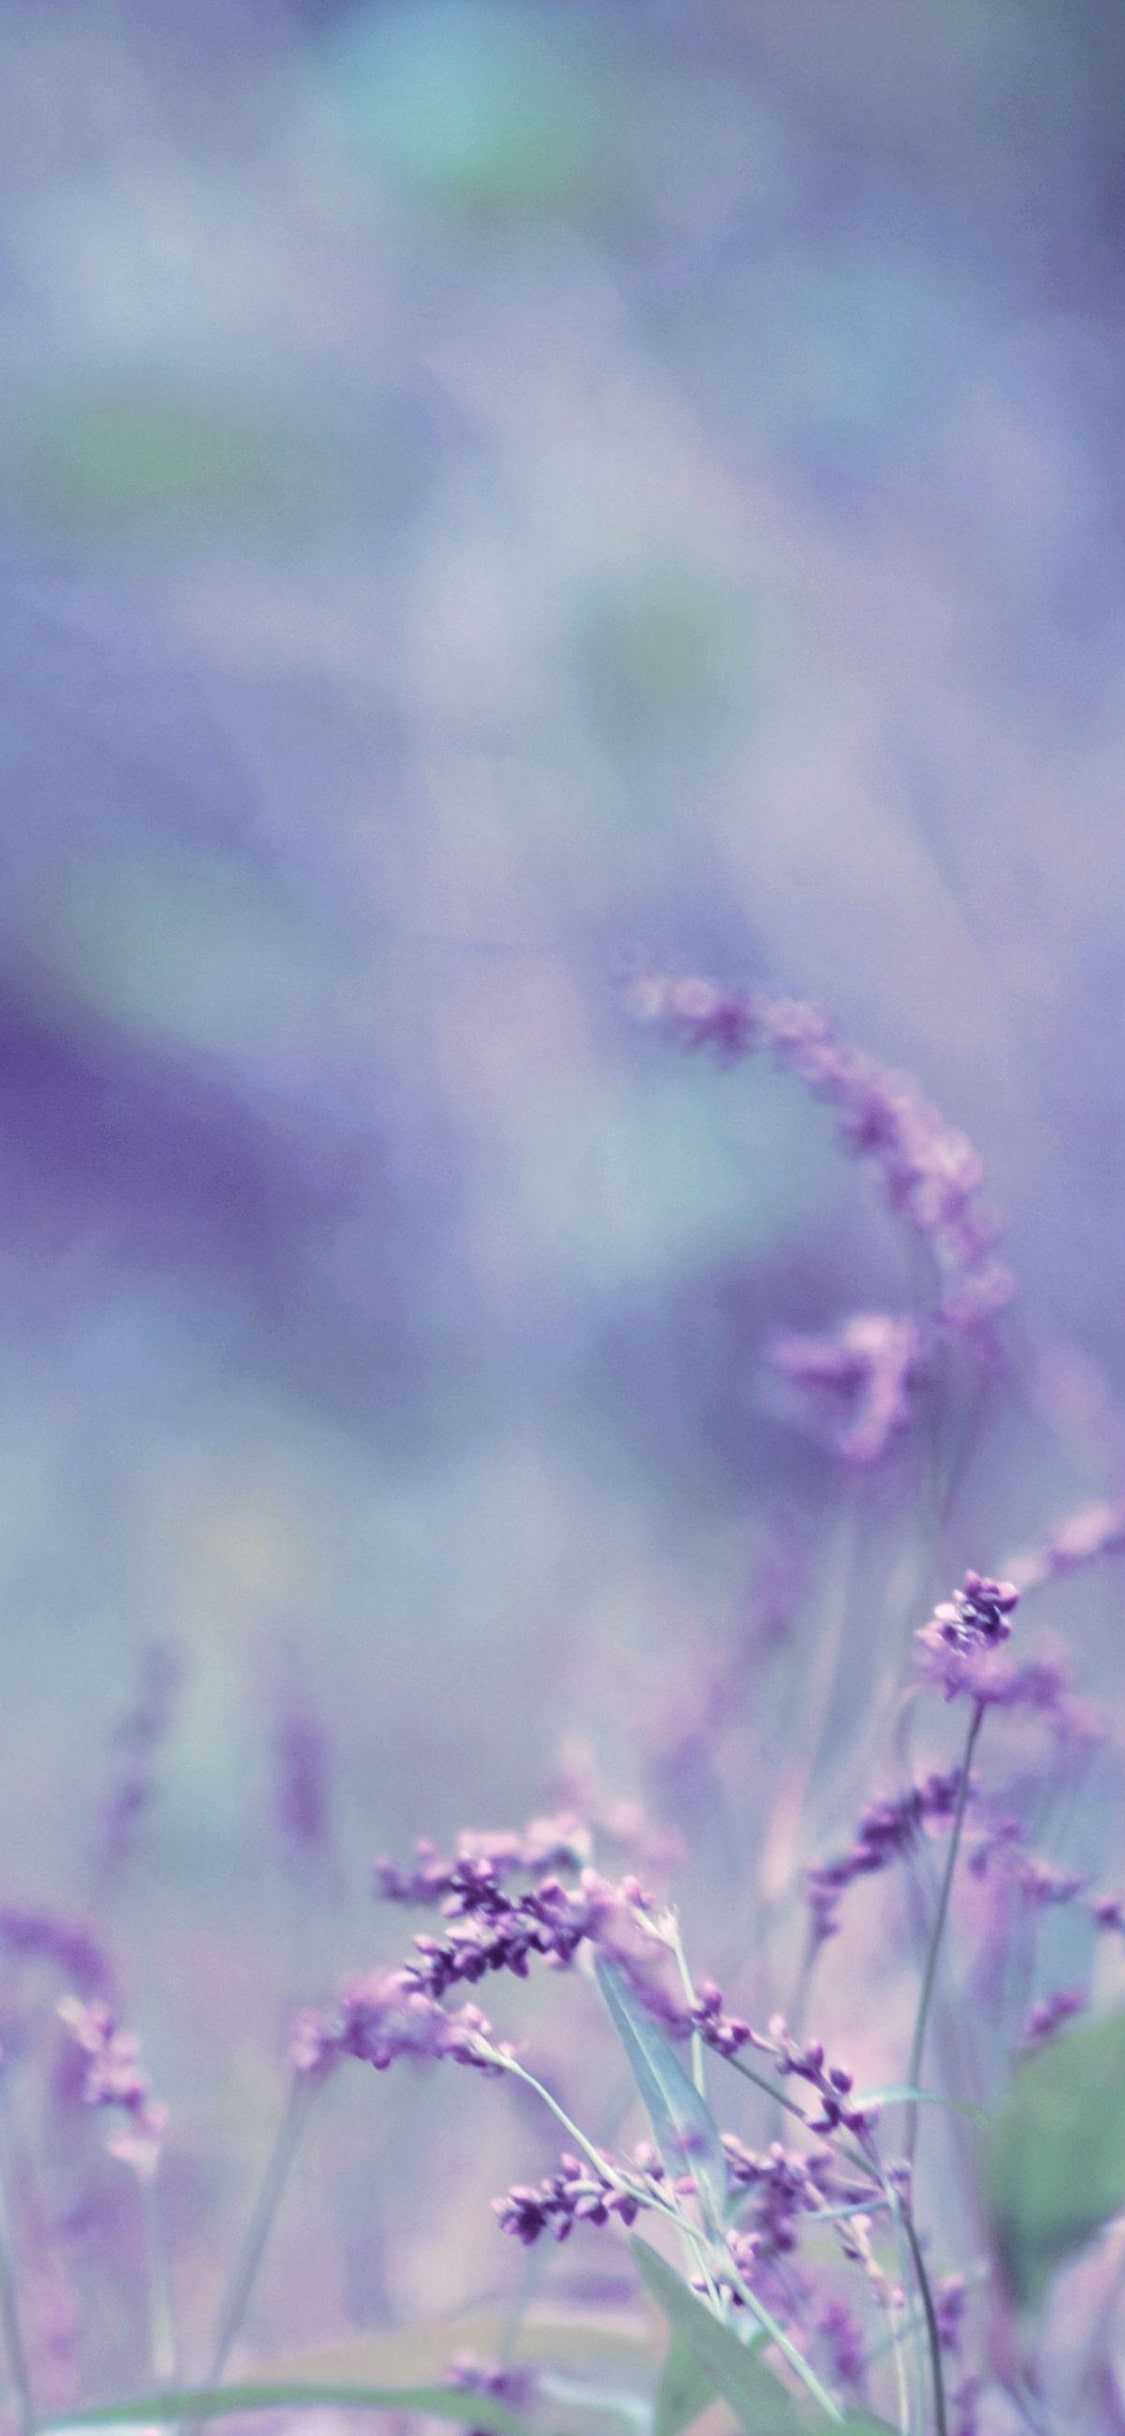 A picture of purple flowers in a field - Lavender